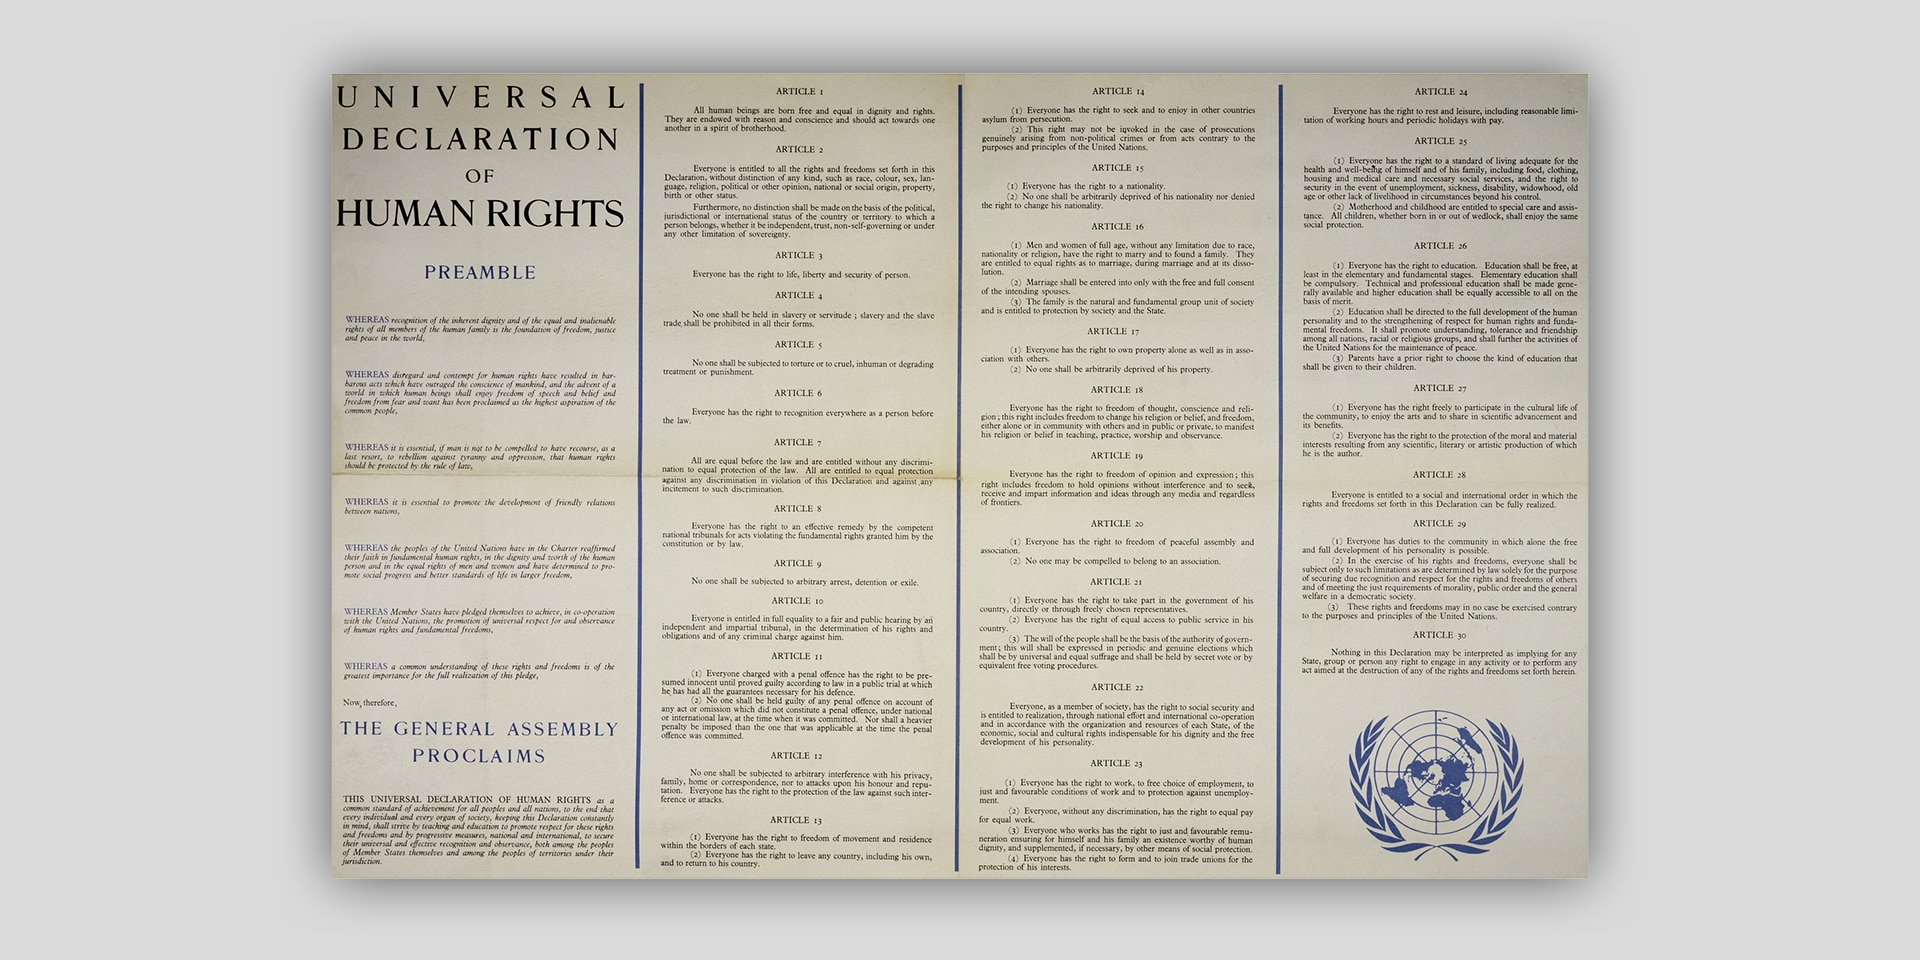 Text of the Universal Declaration of Human Rights.